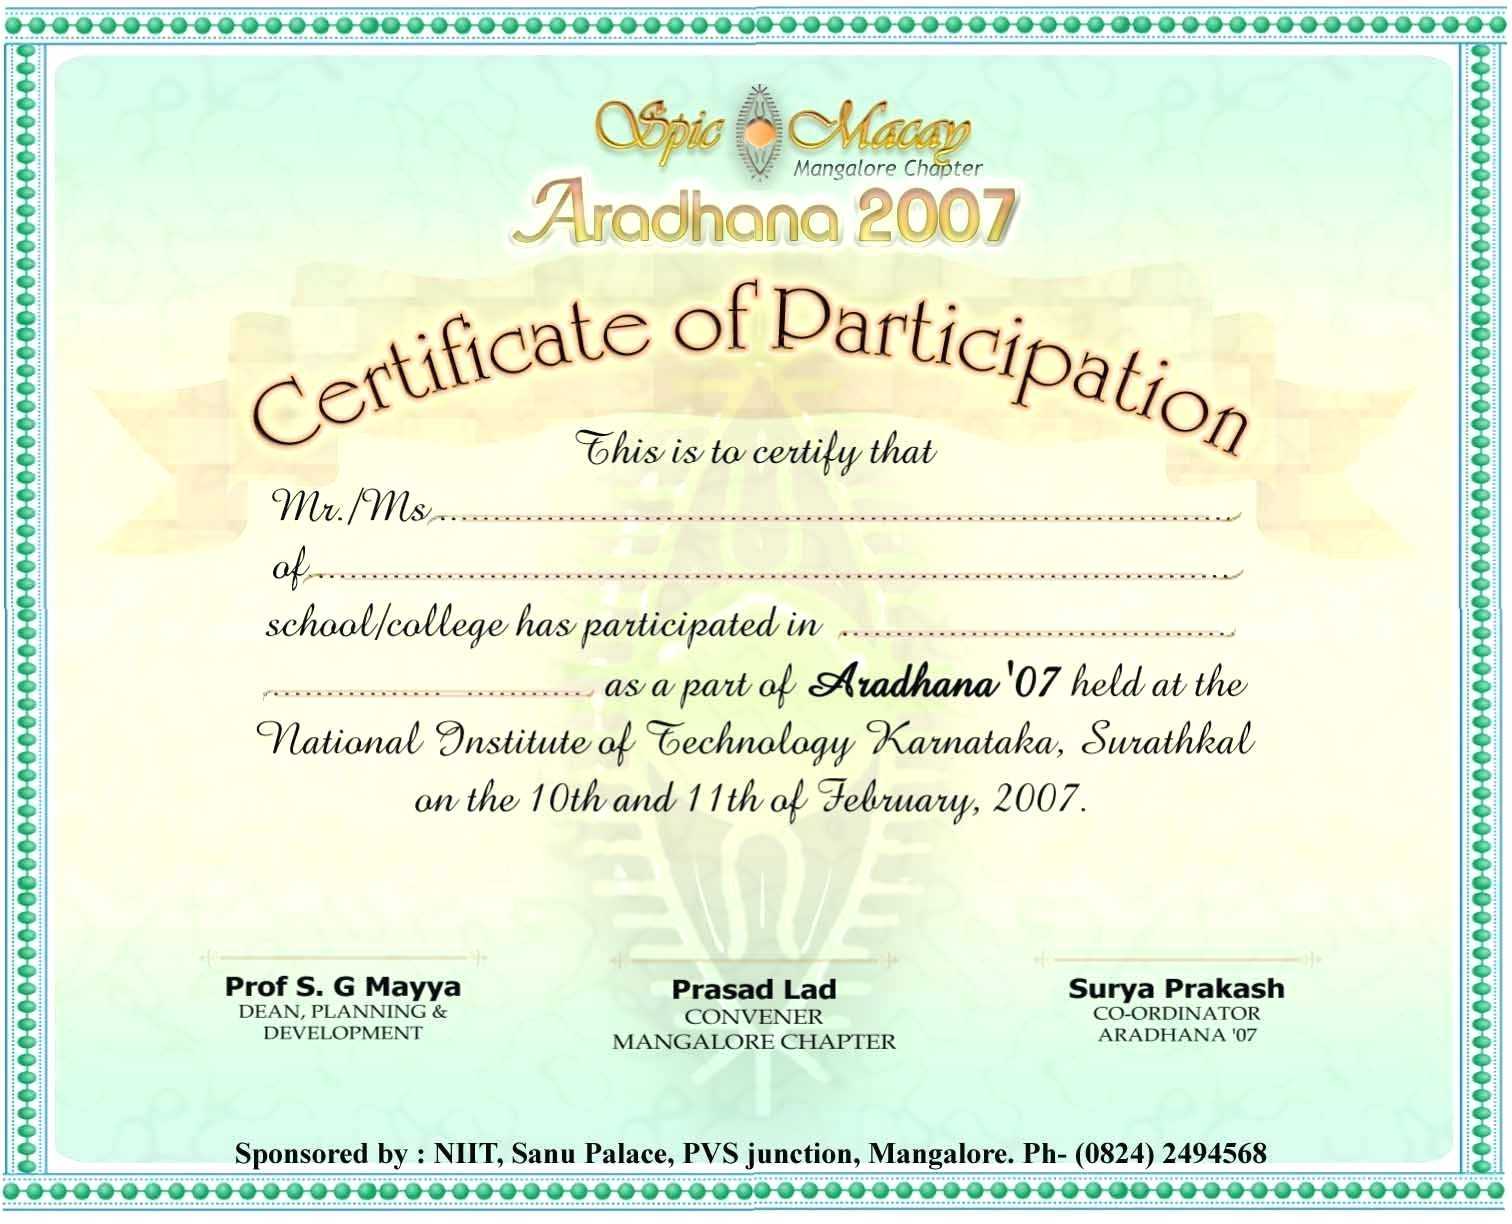 Conference Participation Certificate Template – Bizoptimizer With Conference Participation Certificate Template